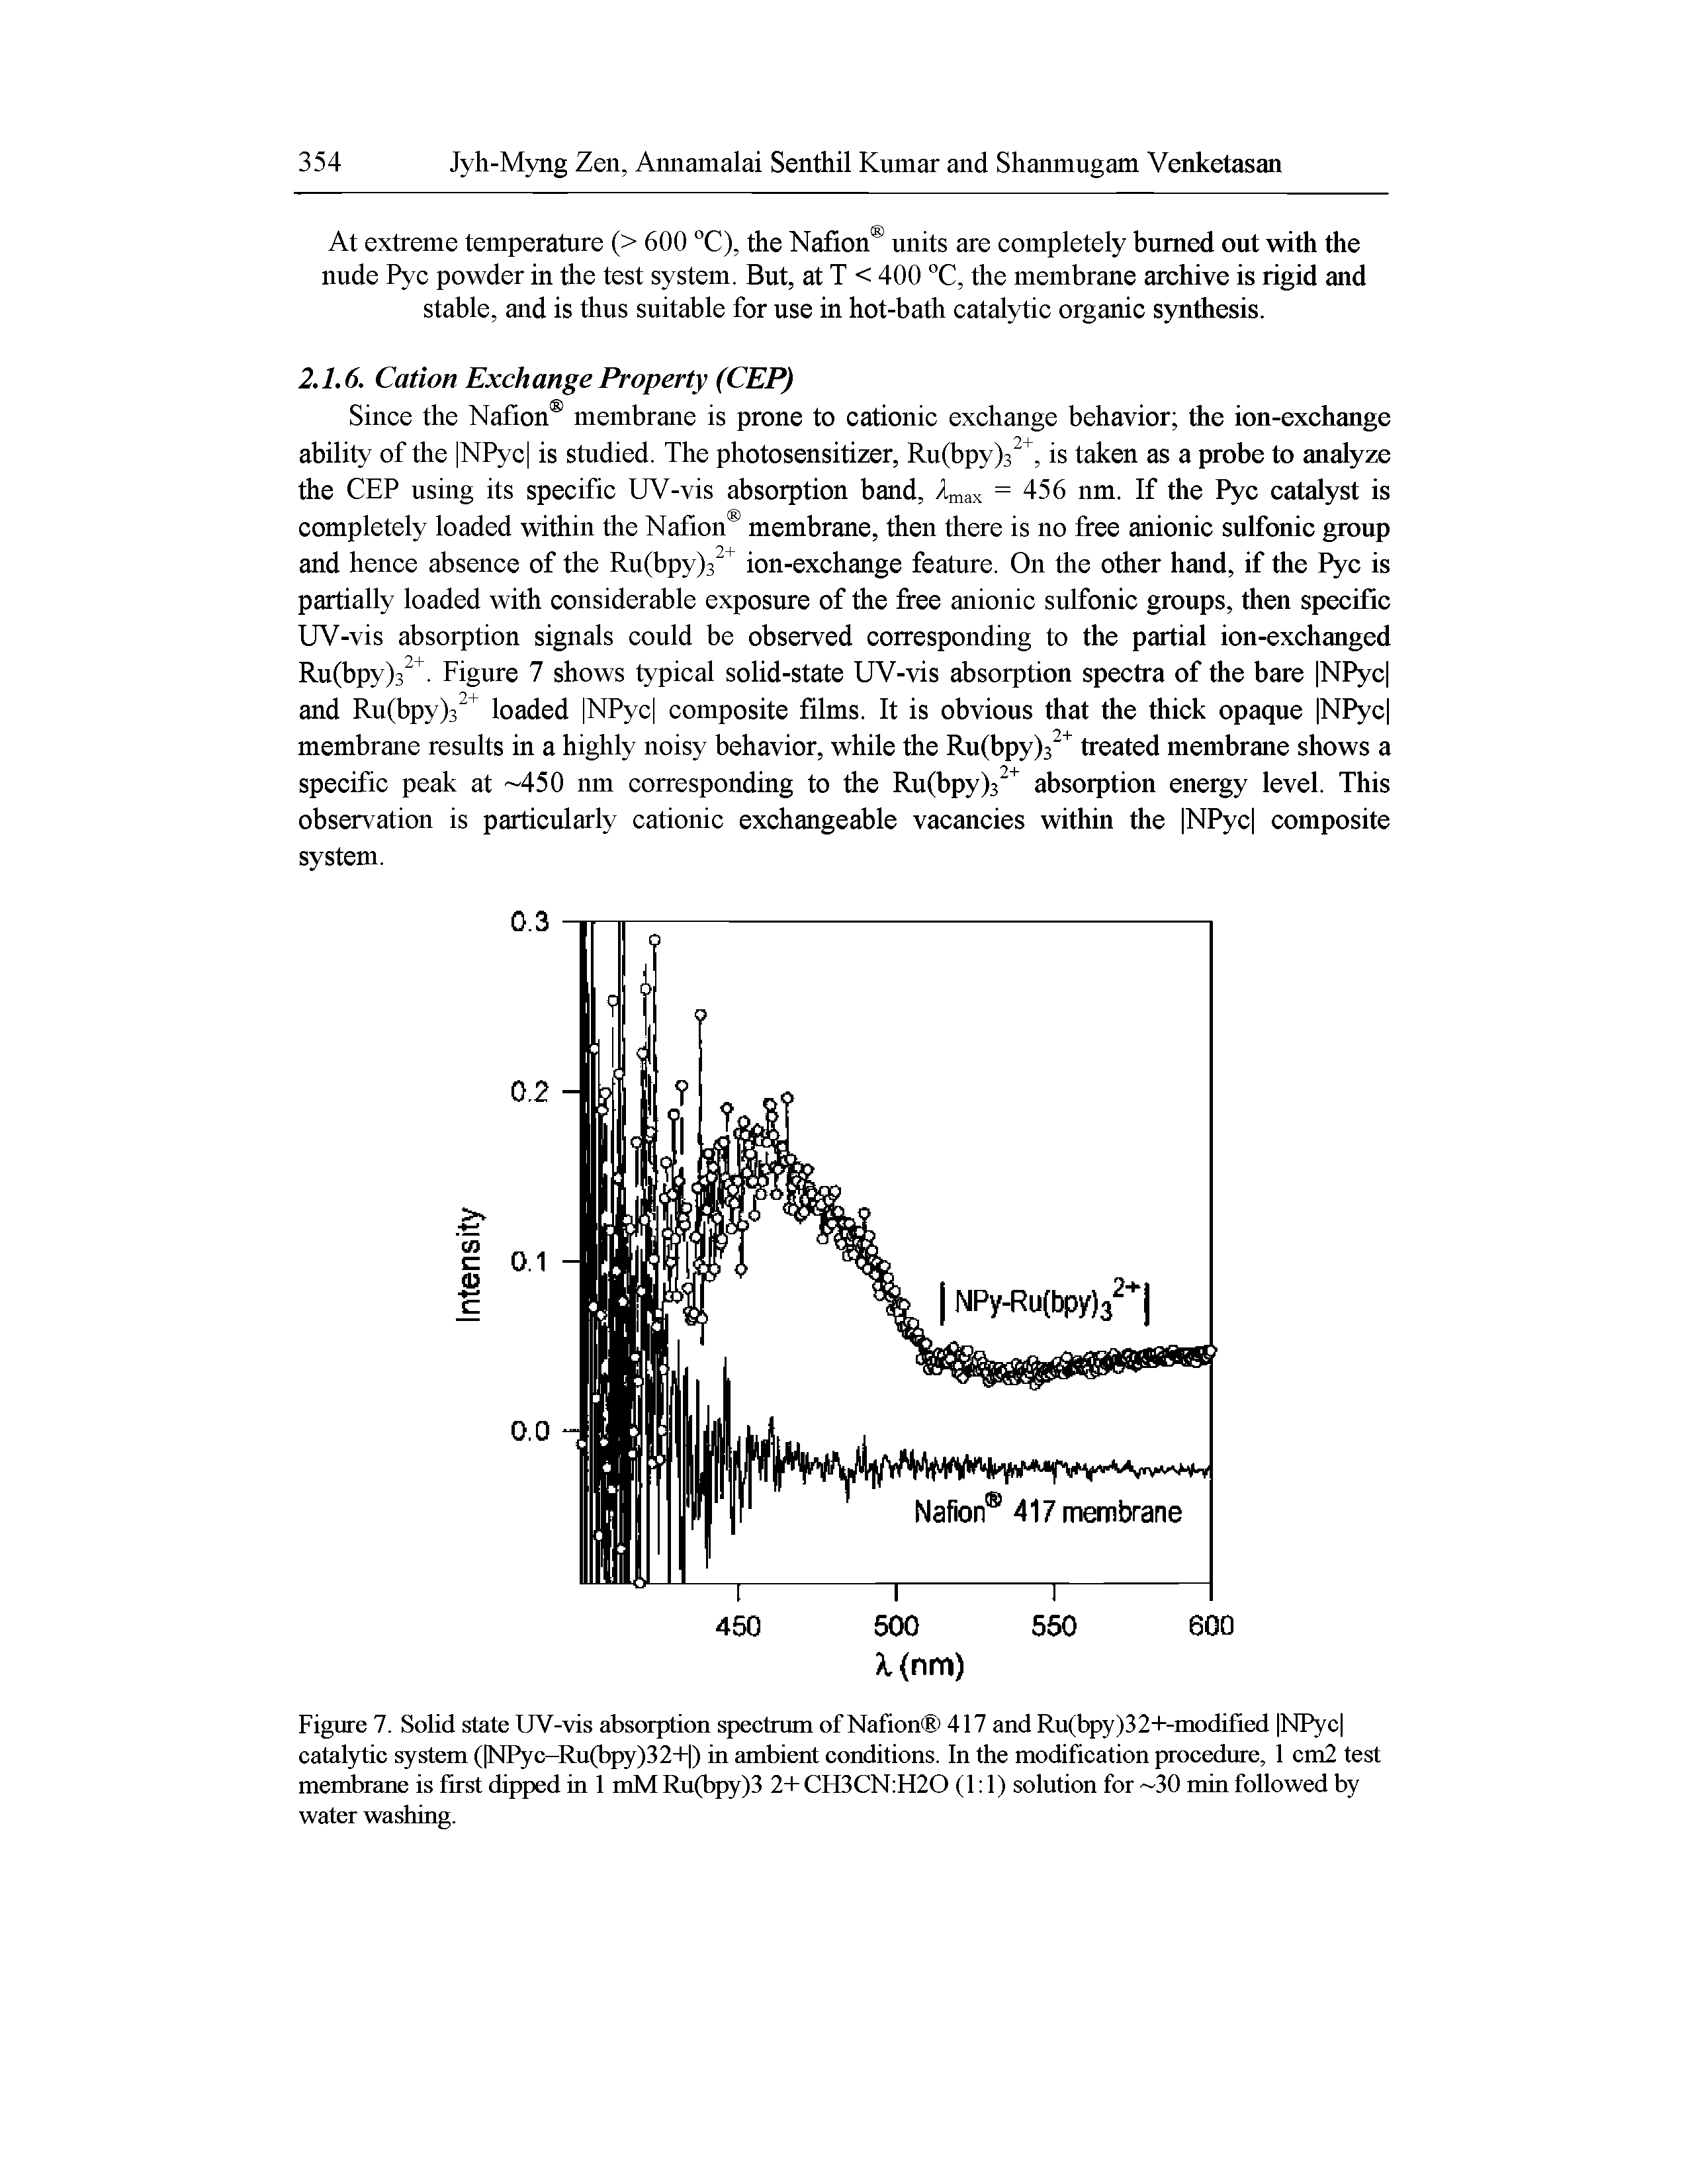 Figure 7. Solid state UV-vis absorption spectrum of Nafion 417 and Ru(bpy)32-l--modified NPyc catalytic system (psrPyc-Ru(bpy)32+ ) in ambient conditions. In the modification procedure, 1 cm2 test membrane is first dipped in 1 mM Ru(bpy)3 2+ CH3CN H20 (1 1) solution for 30 min followed by water washing.